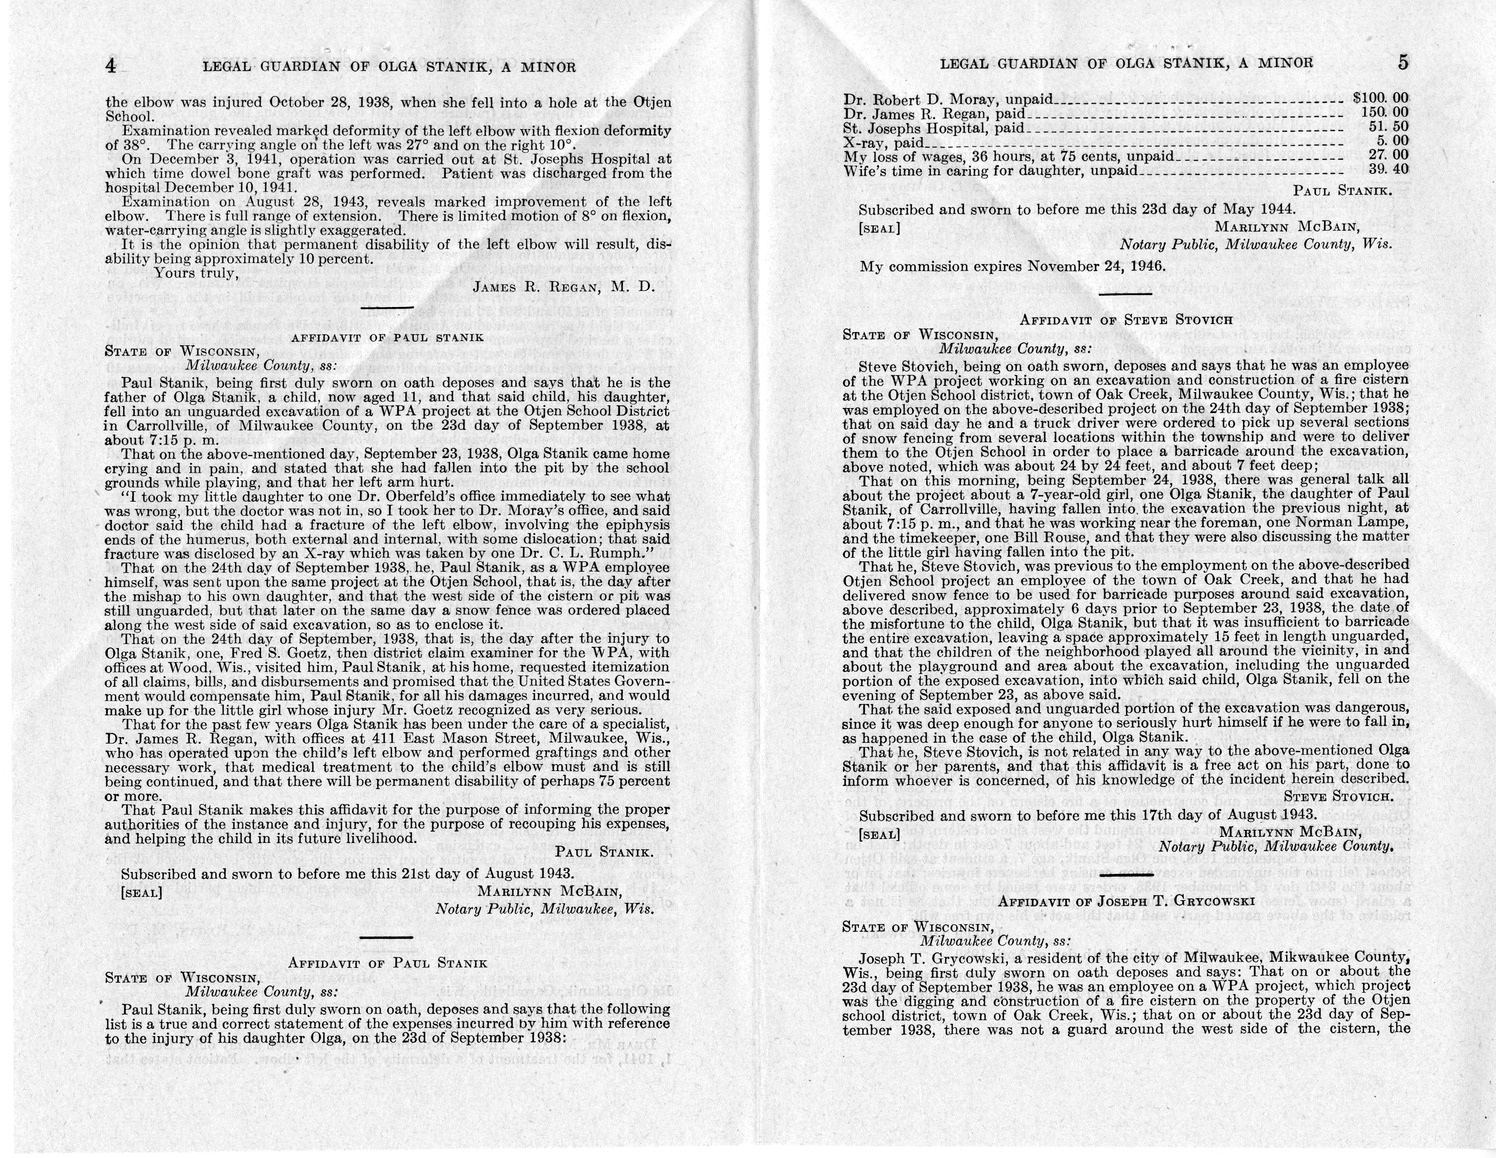 Memorandum from Frederick J. Bailey to M. C. Latta, H. R. 3514, For the Relief of the Legal Guardian of Olga Stanik, a Minor, with Attachments